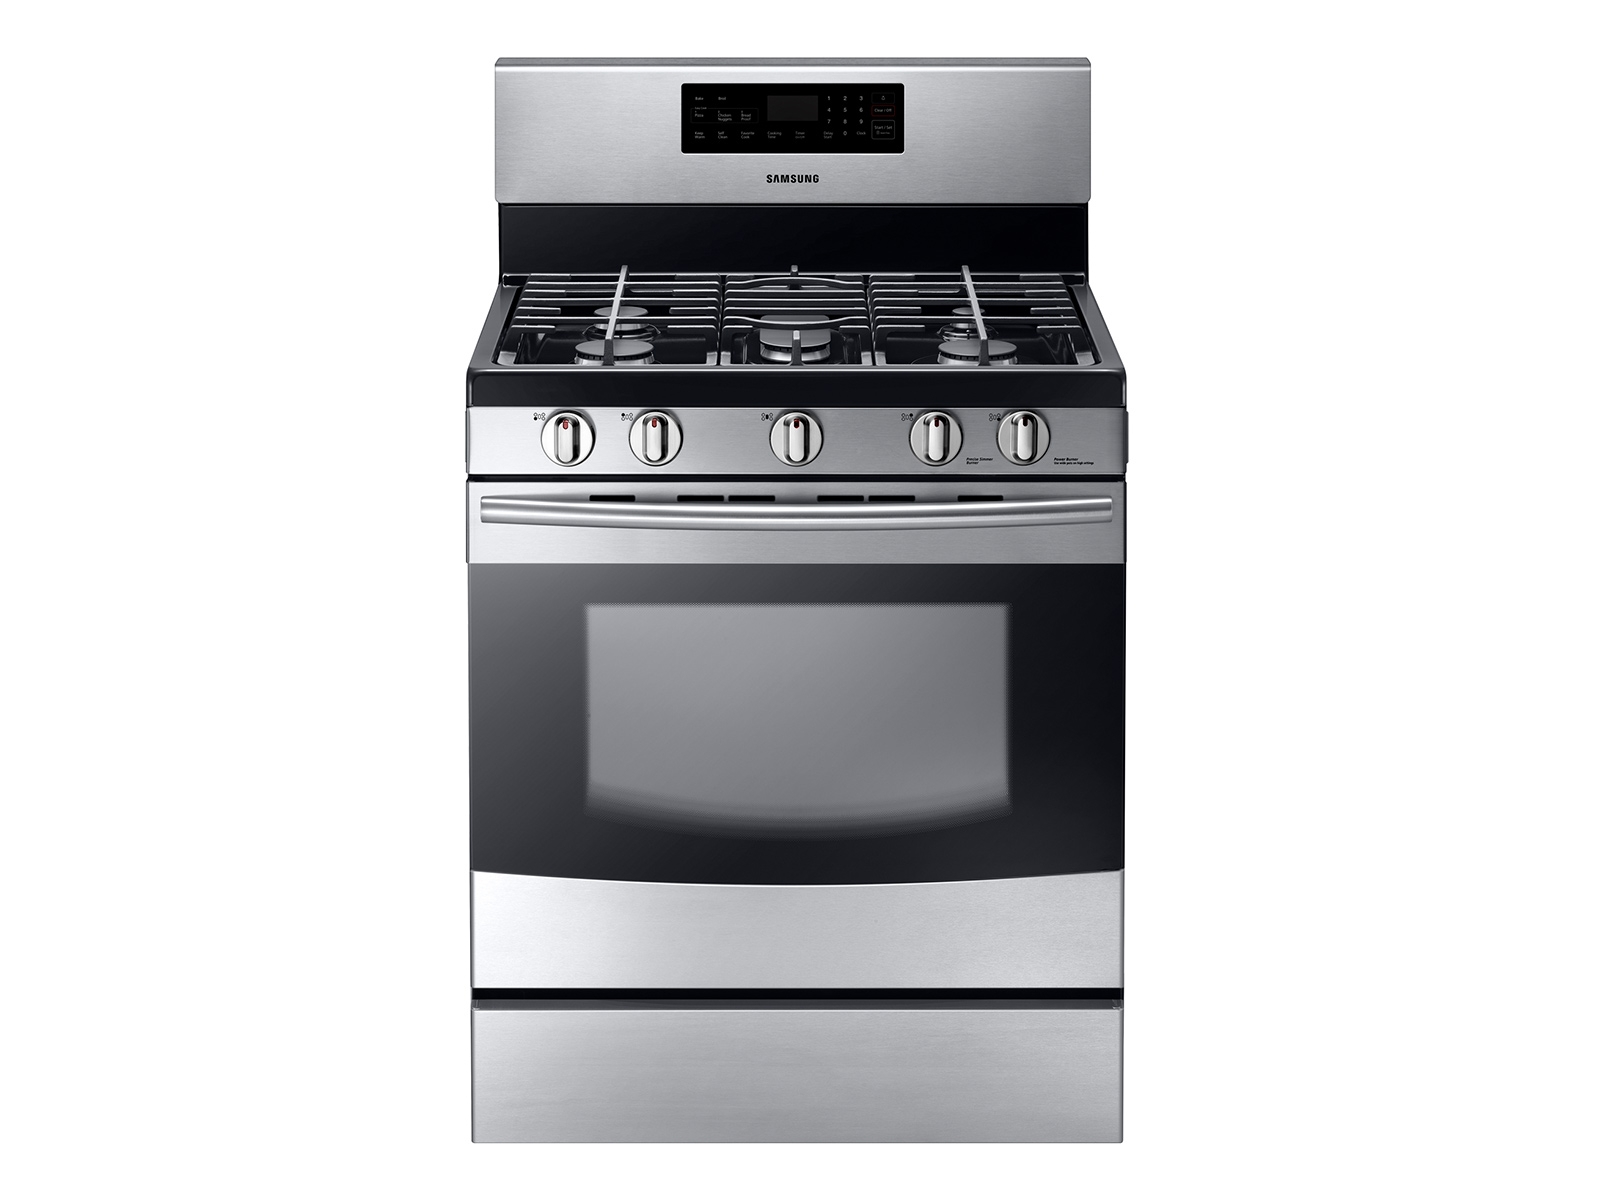 https://image-us.samsung.com/SamsungUS/home/home-appliances/ranges/all/pd/nx58f5500ss/gallery/01_Range_Gas_NX58F5500SS_Front_Closed_Silver.jpg